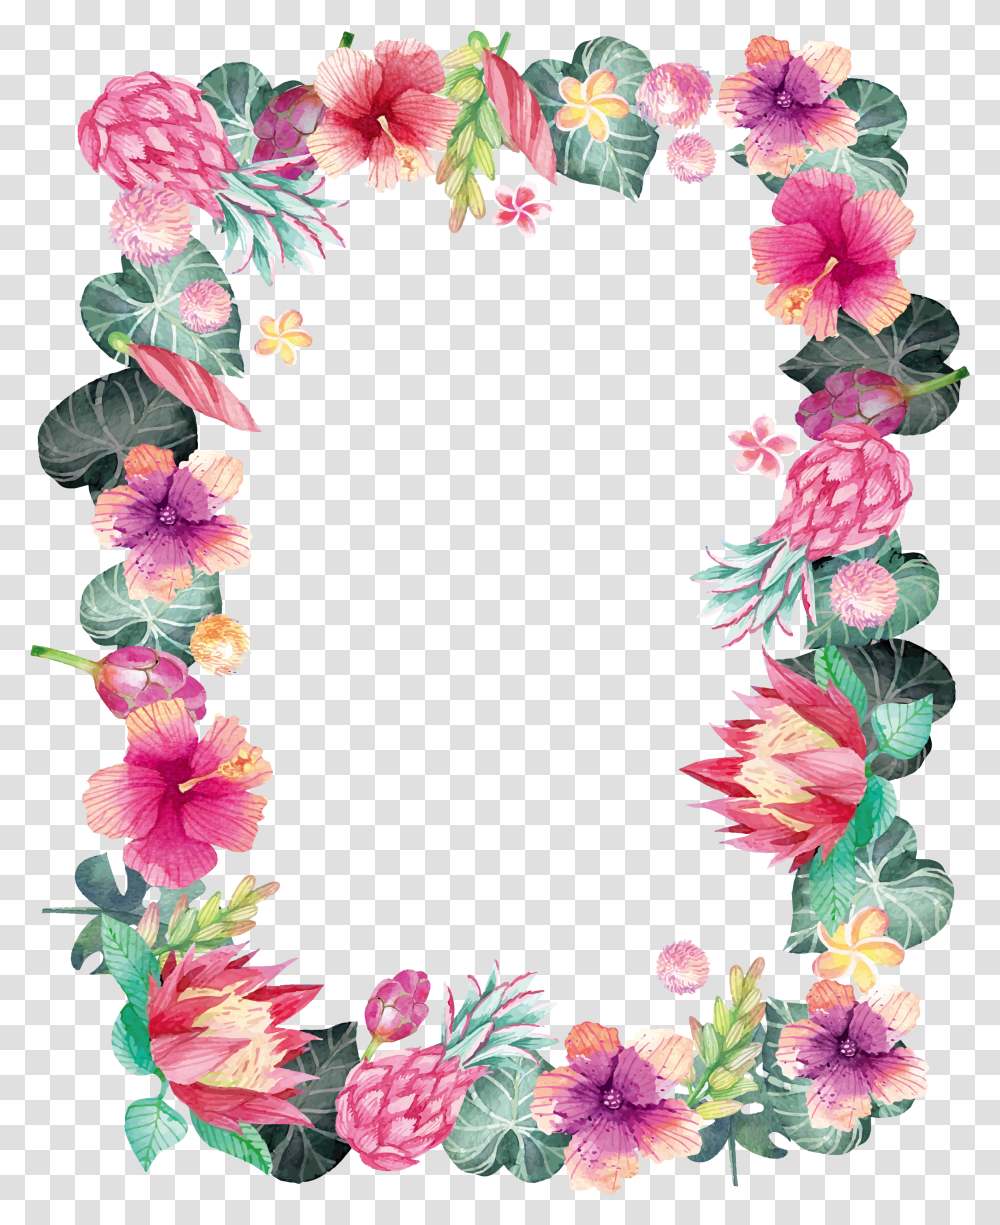 Watercolour Flowers Watercolor Painting Watercolor Flower Frame Free, Plant, Blossom, Wreath, Floral Design Transparent Png